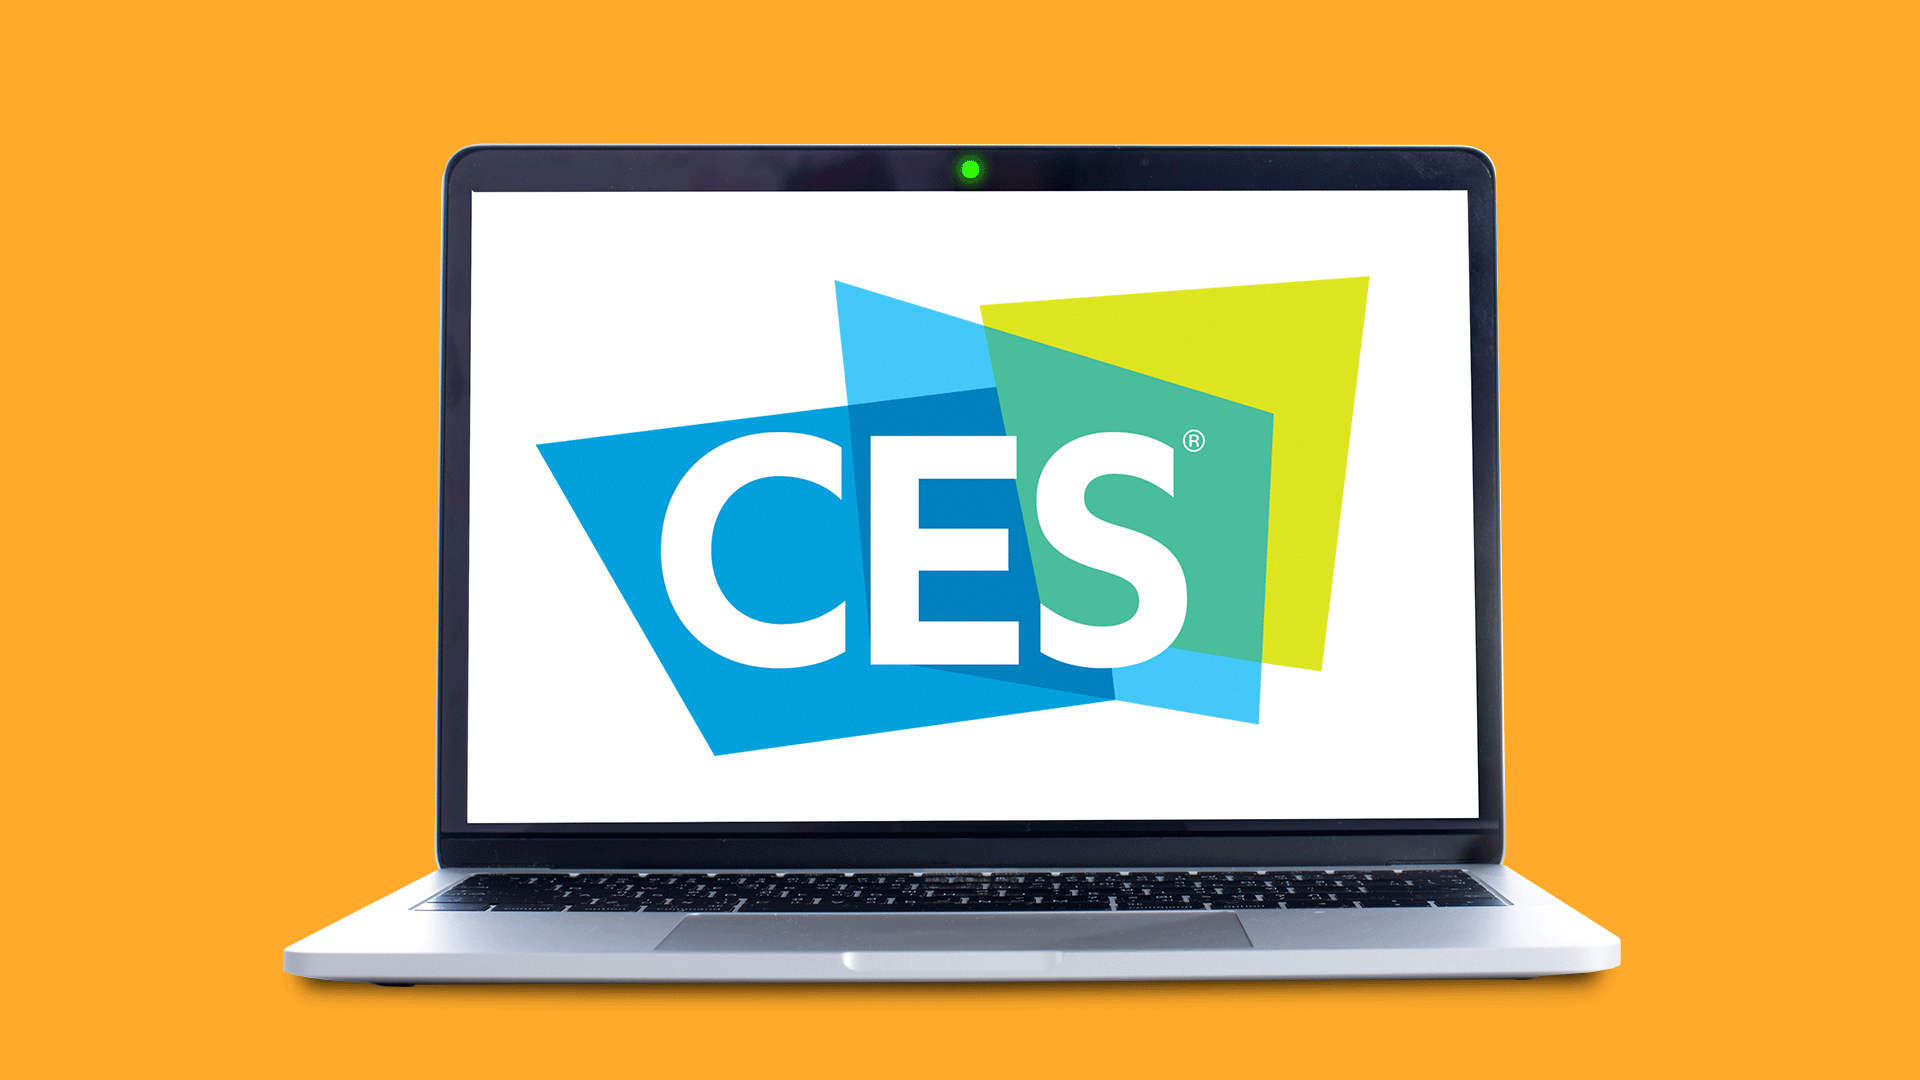 An illustration of the CES logo on a computer screen